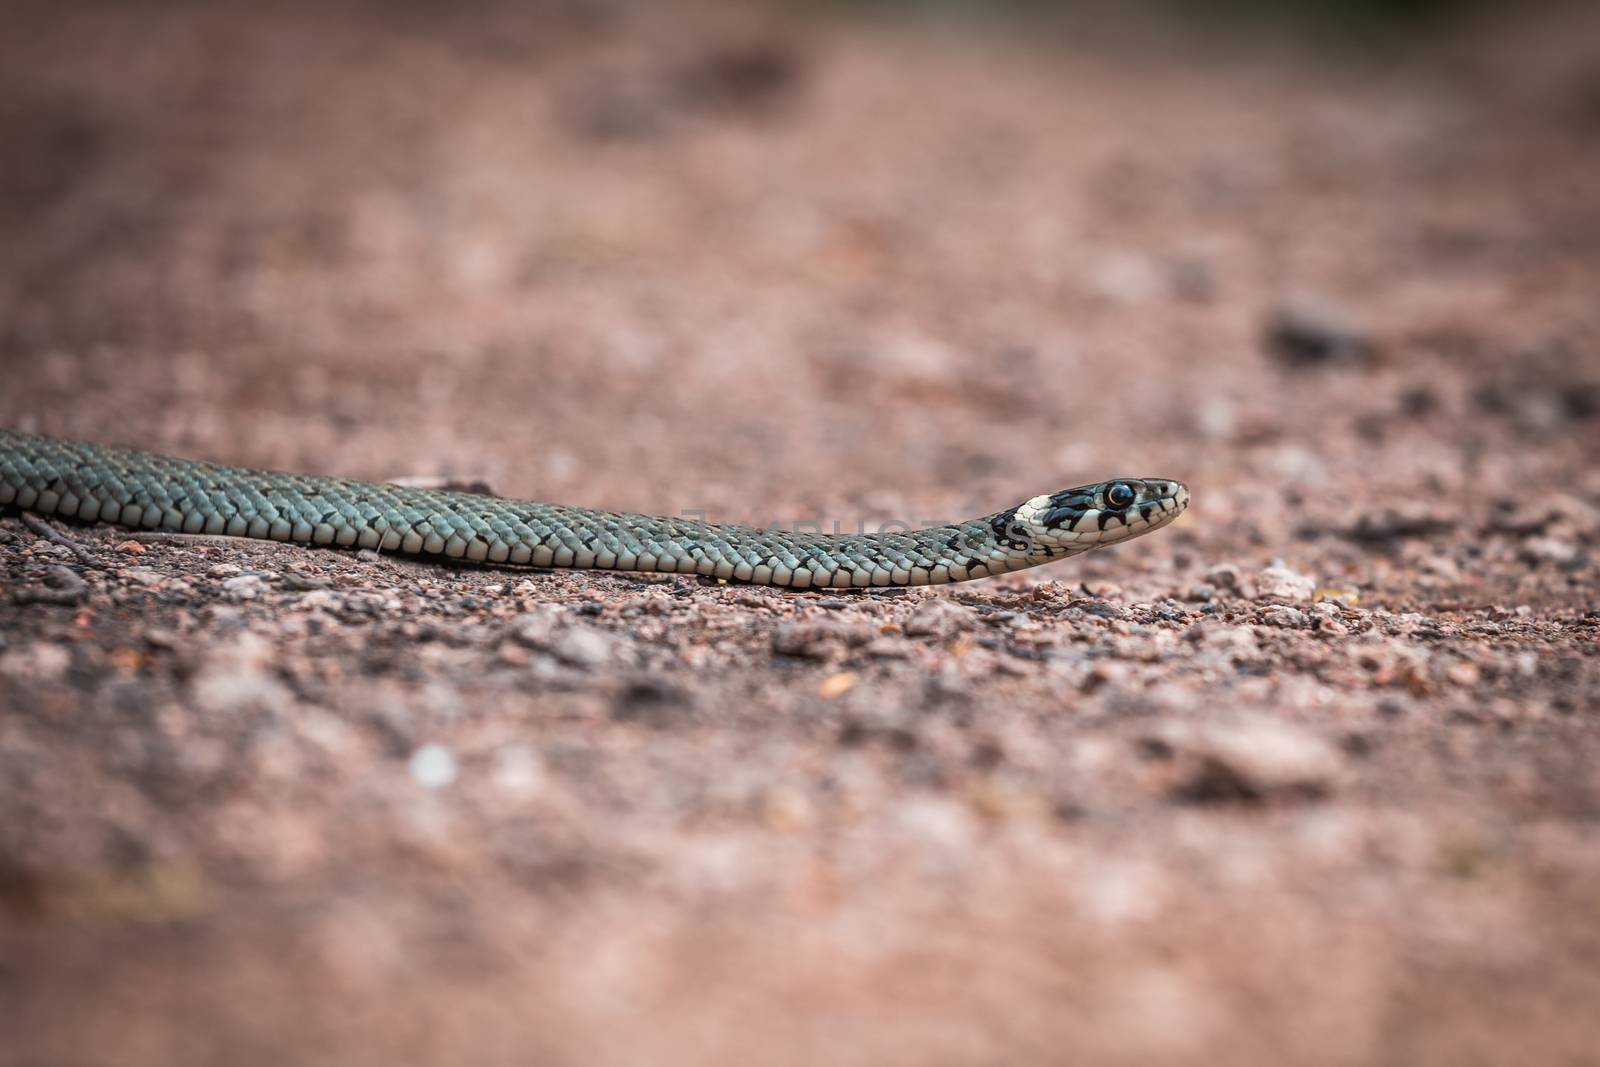 Masculine reptile or grass snake